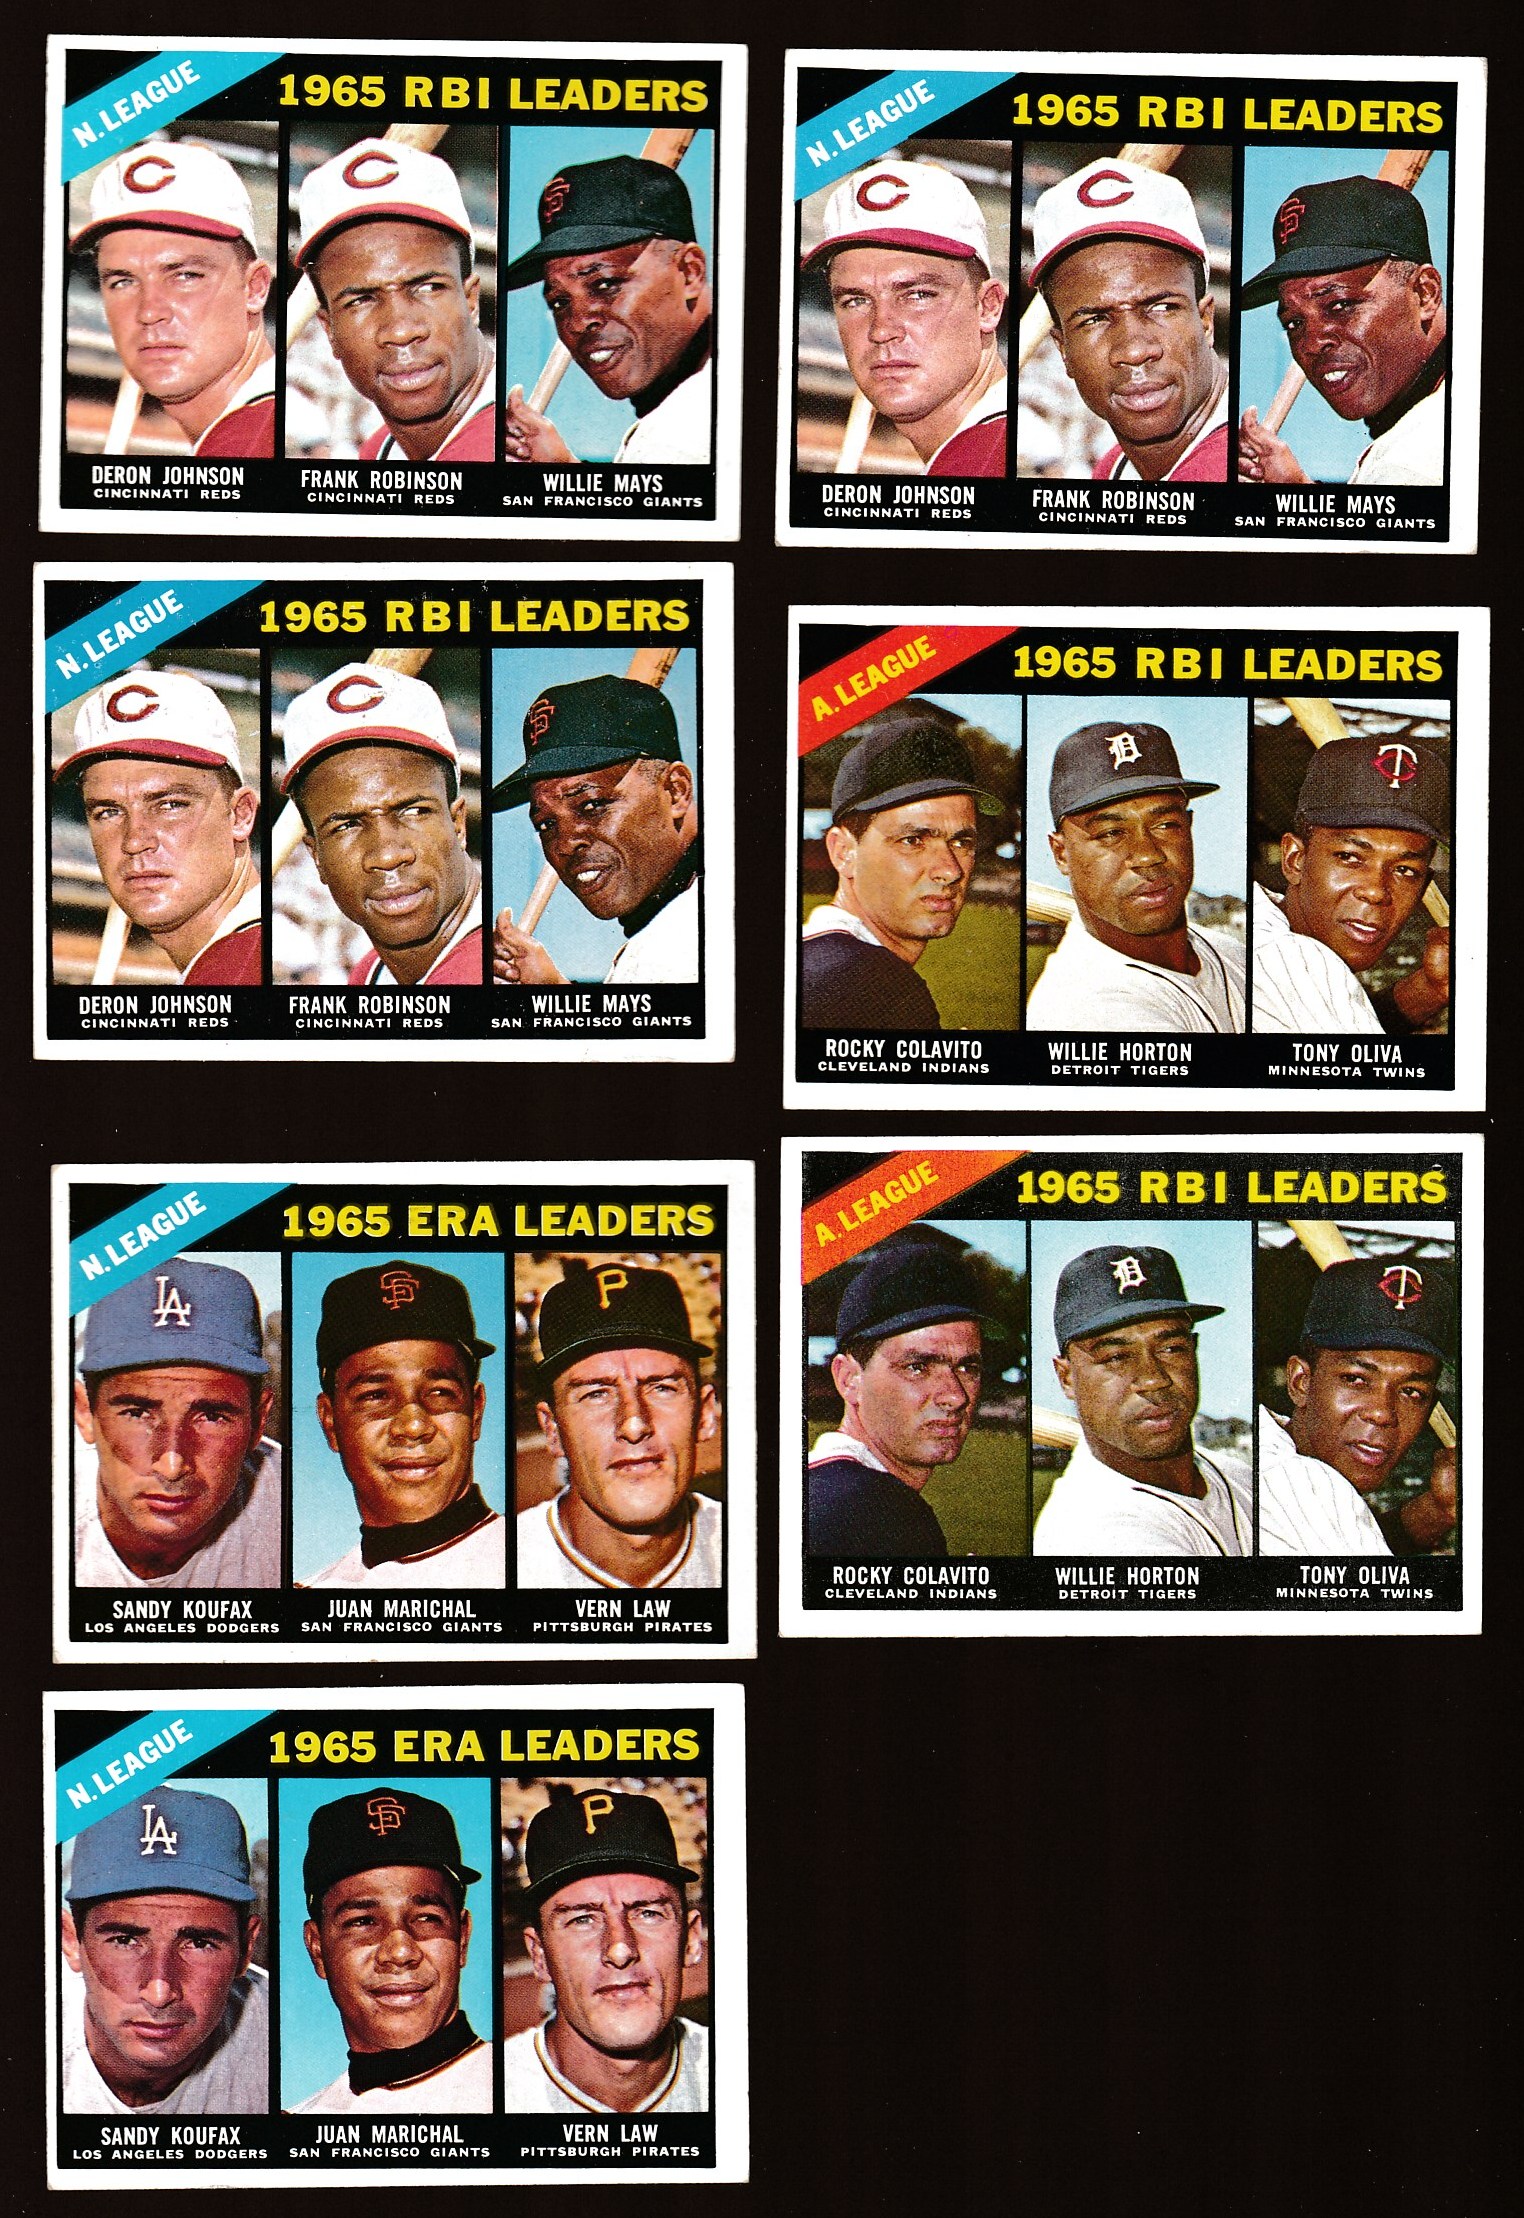 1966 Topps #219 N.L. RBI Leaders (Willie Mays,Frank Robinson) Baseball cards value